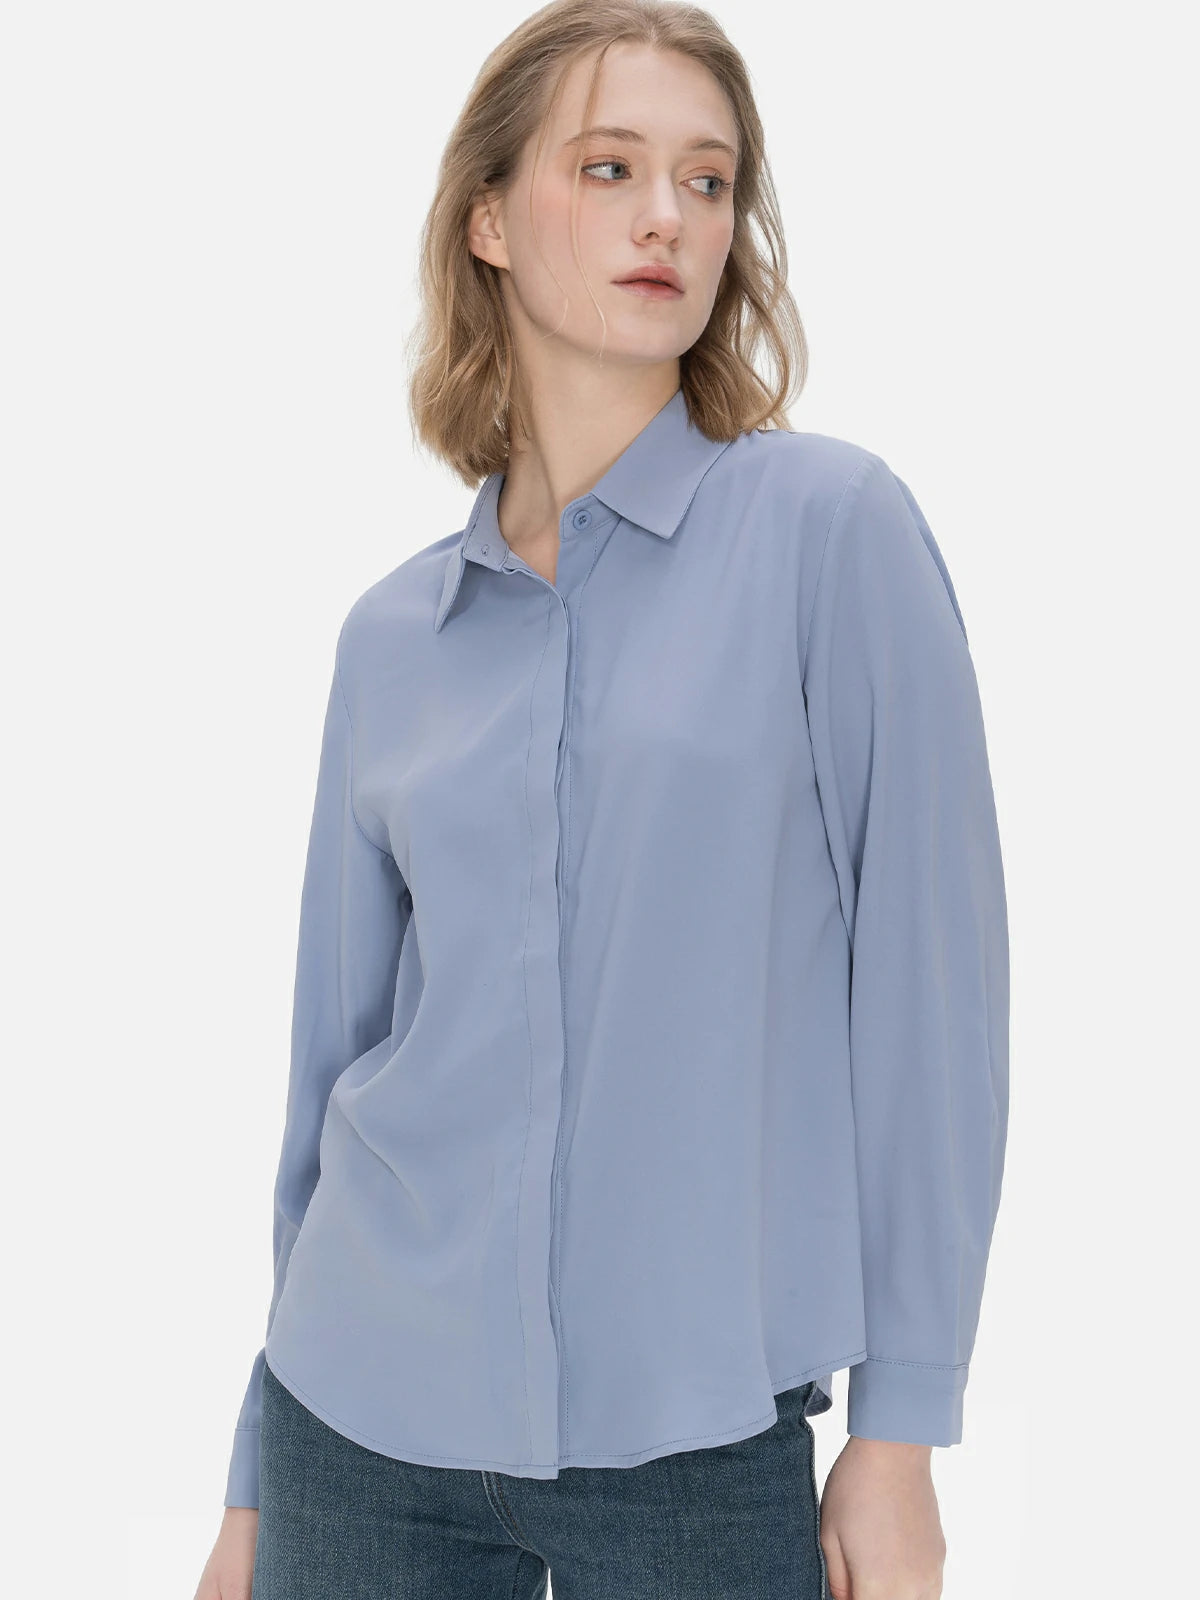 Comfortable and versatile blue chiffon shirt with a tailored cut and turnover collar, ideal for expressing feminine charm in different styles.